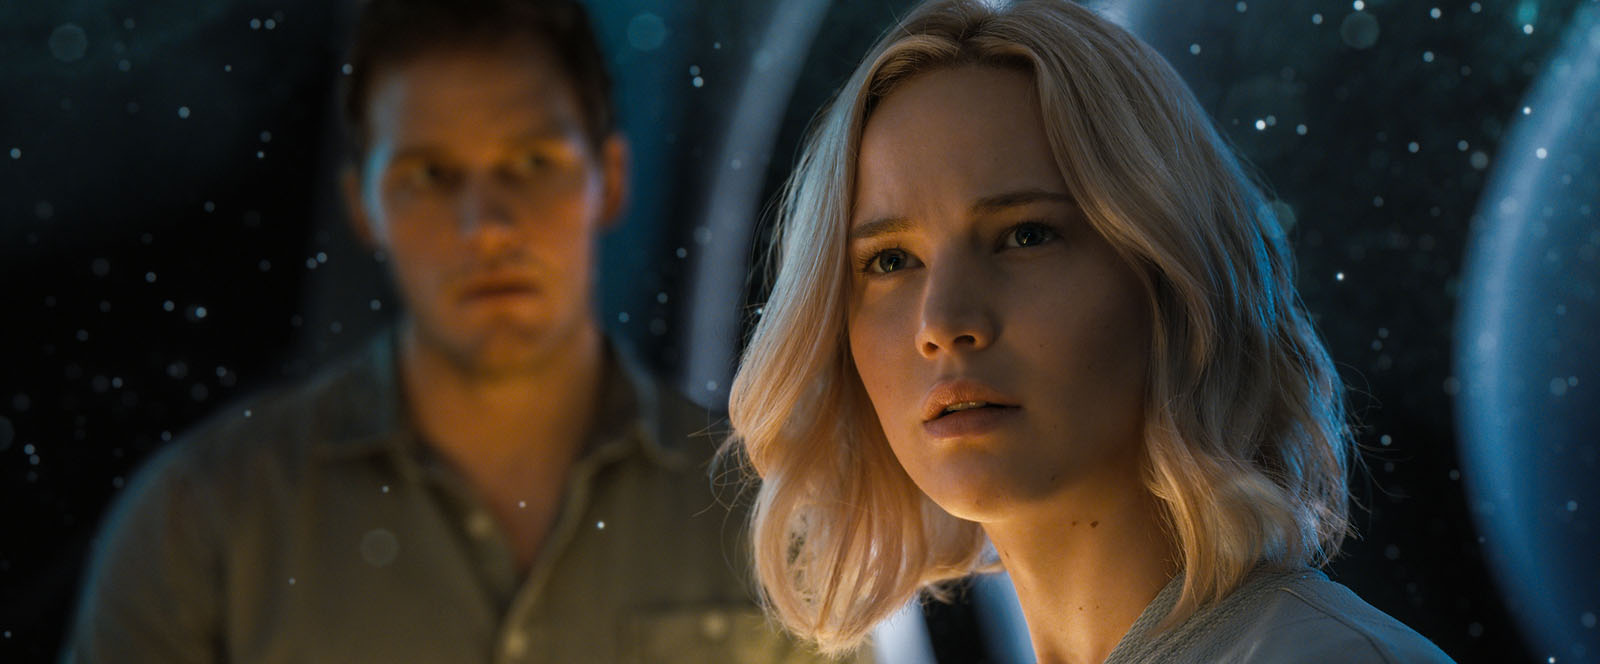 Chris Pratt and Jennifer Lawrence star in Columbia Pictures' PASSENGERS.